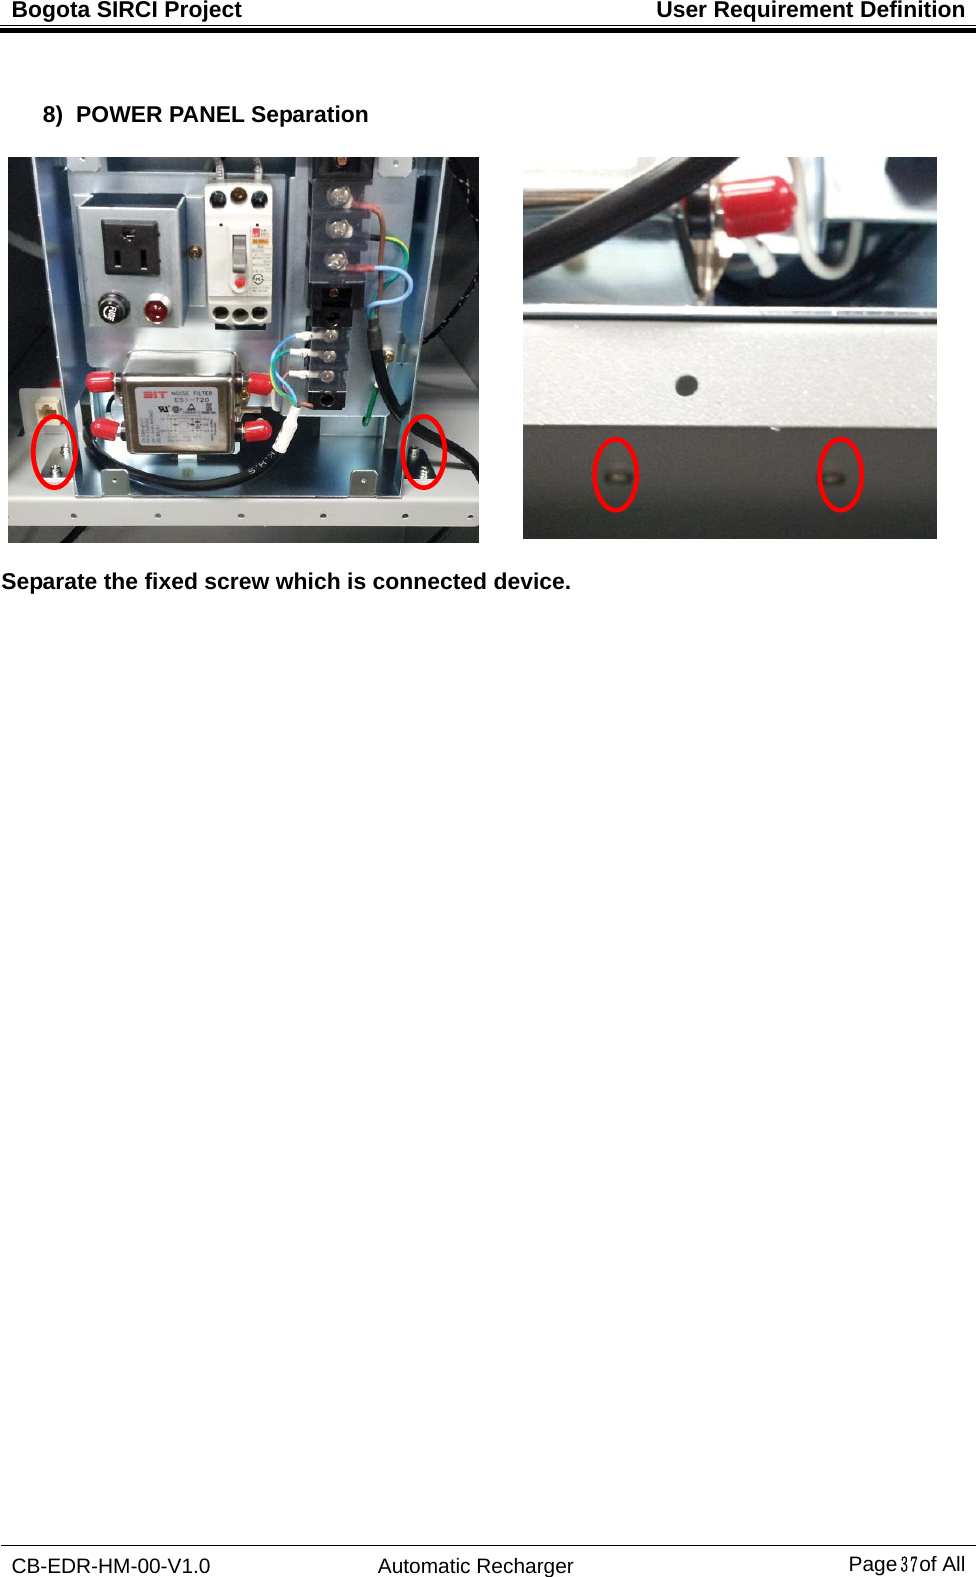 Bogota SIRCI Project  User Requirement Definition CB-EDR-HM-00-V1.0 Automatic Recharger Page３７ of All  8)  POWER PANEL Separation  Separate the fixed screw which is connected device.     